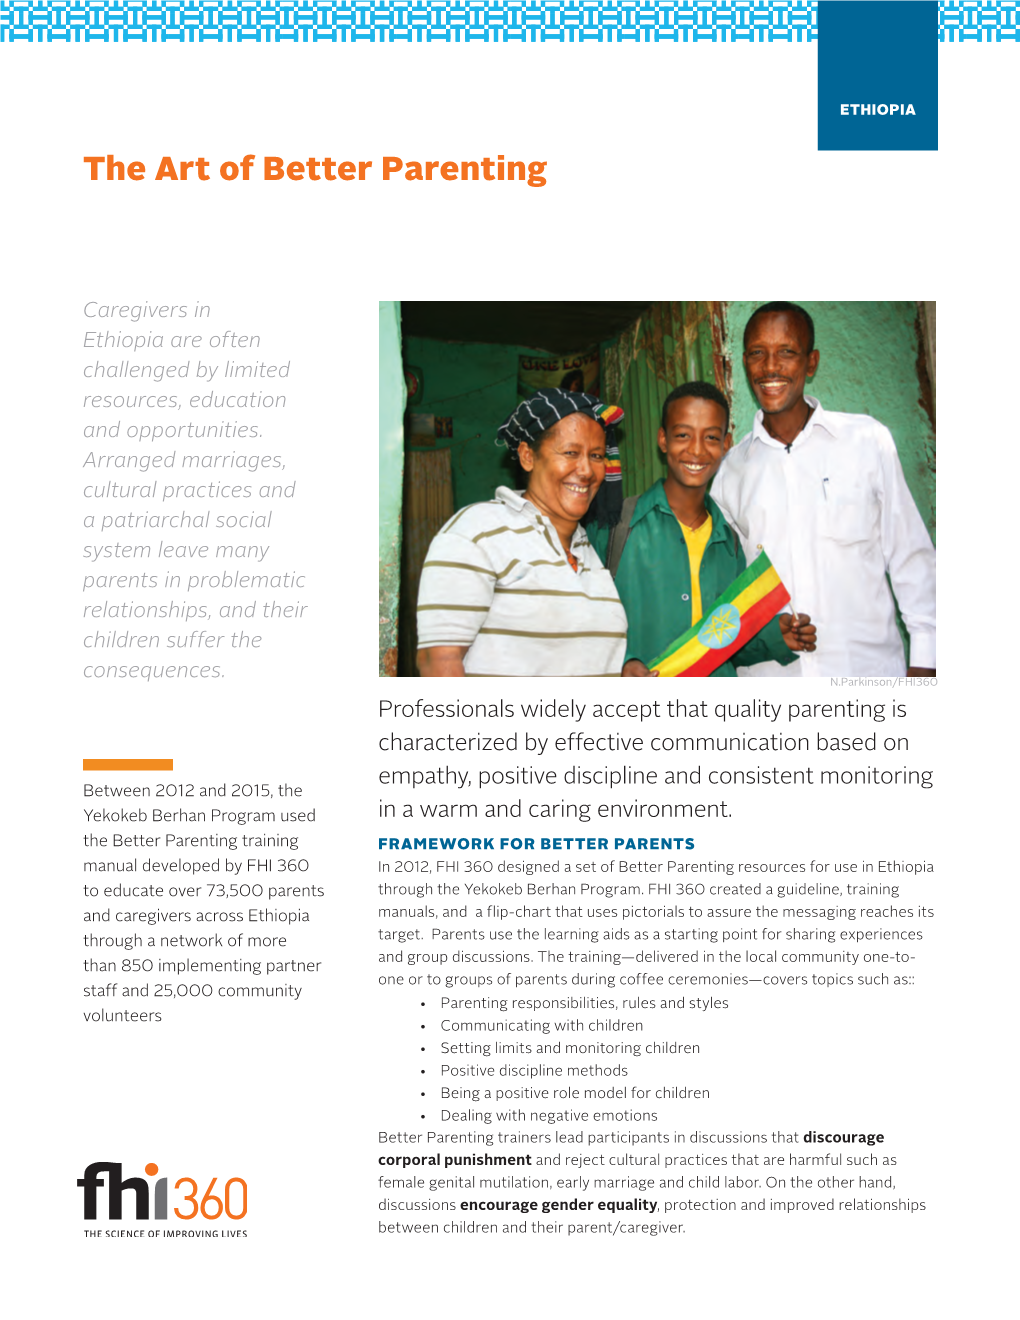 The Art of Better Parenting